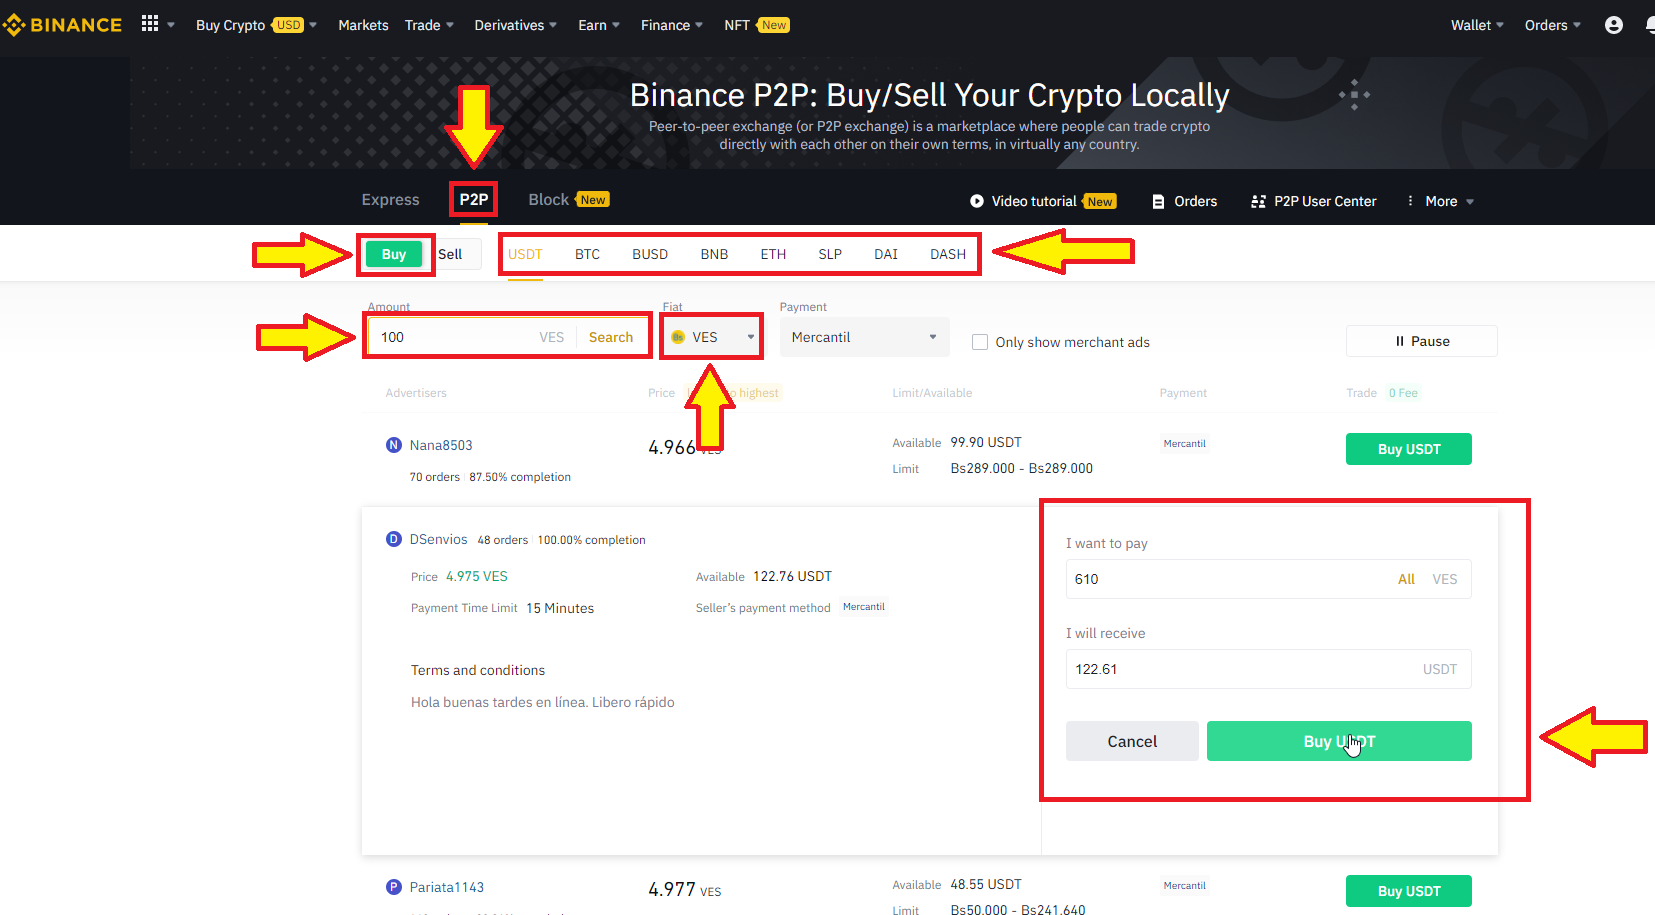 Buy Polymath crypto in P2P with a verified account on Binance